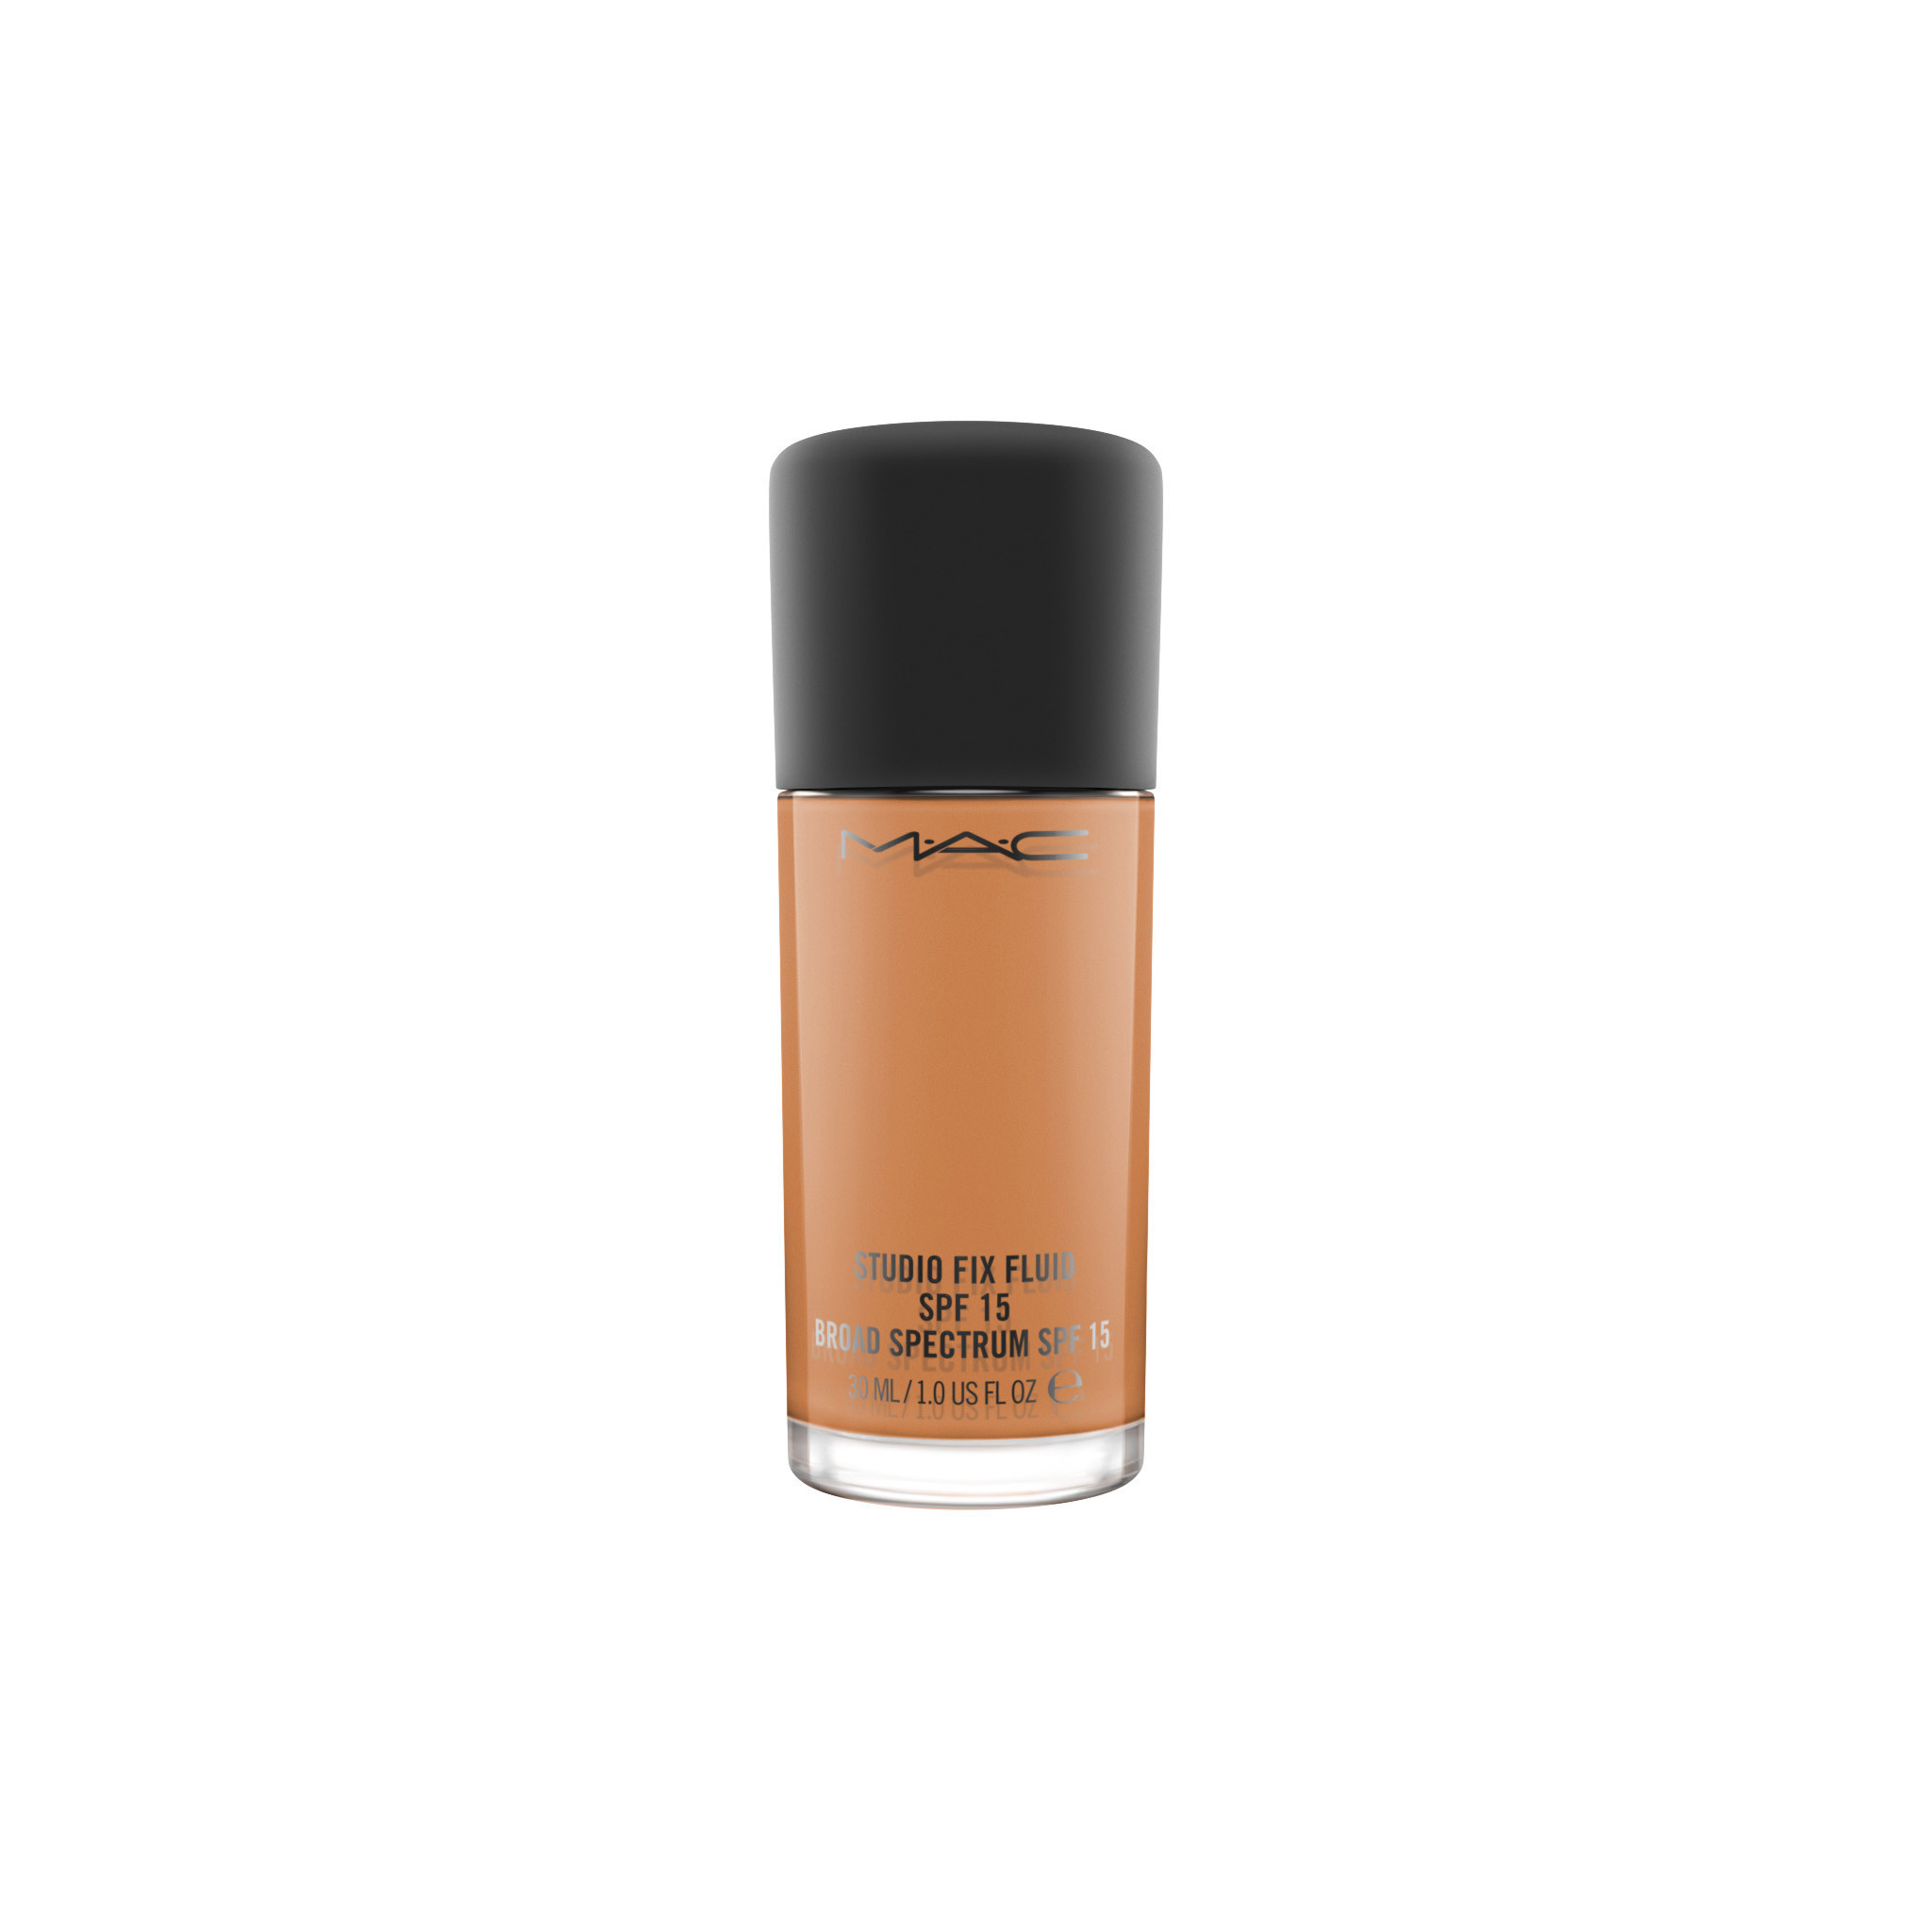 Studio Fix Fluid Foundation Spf15 - NW45, NW45, large image number 0